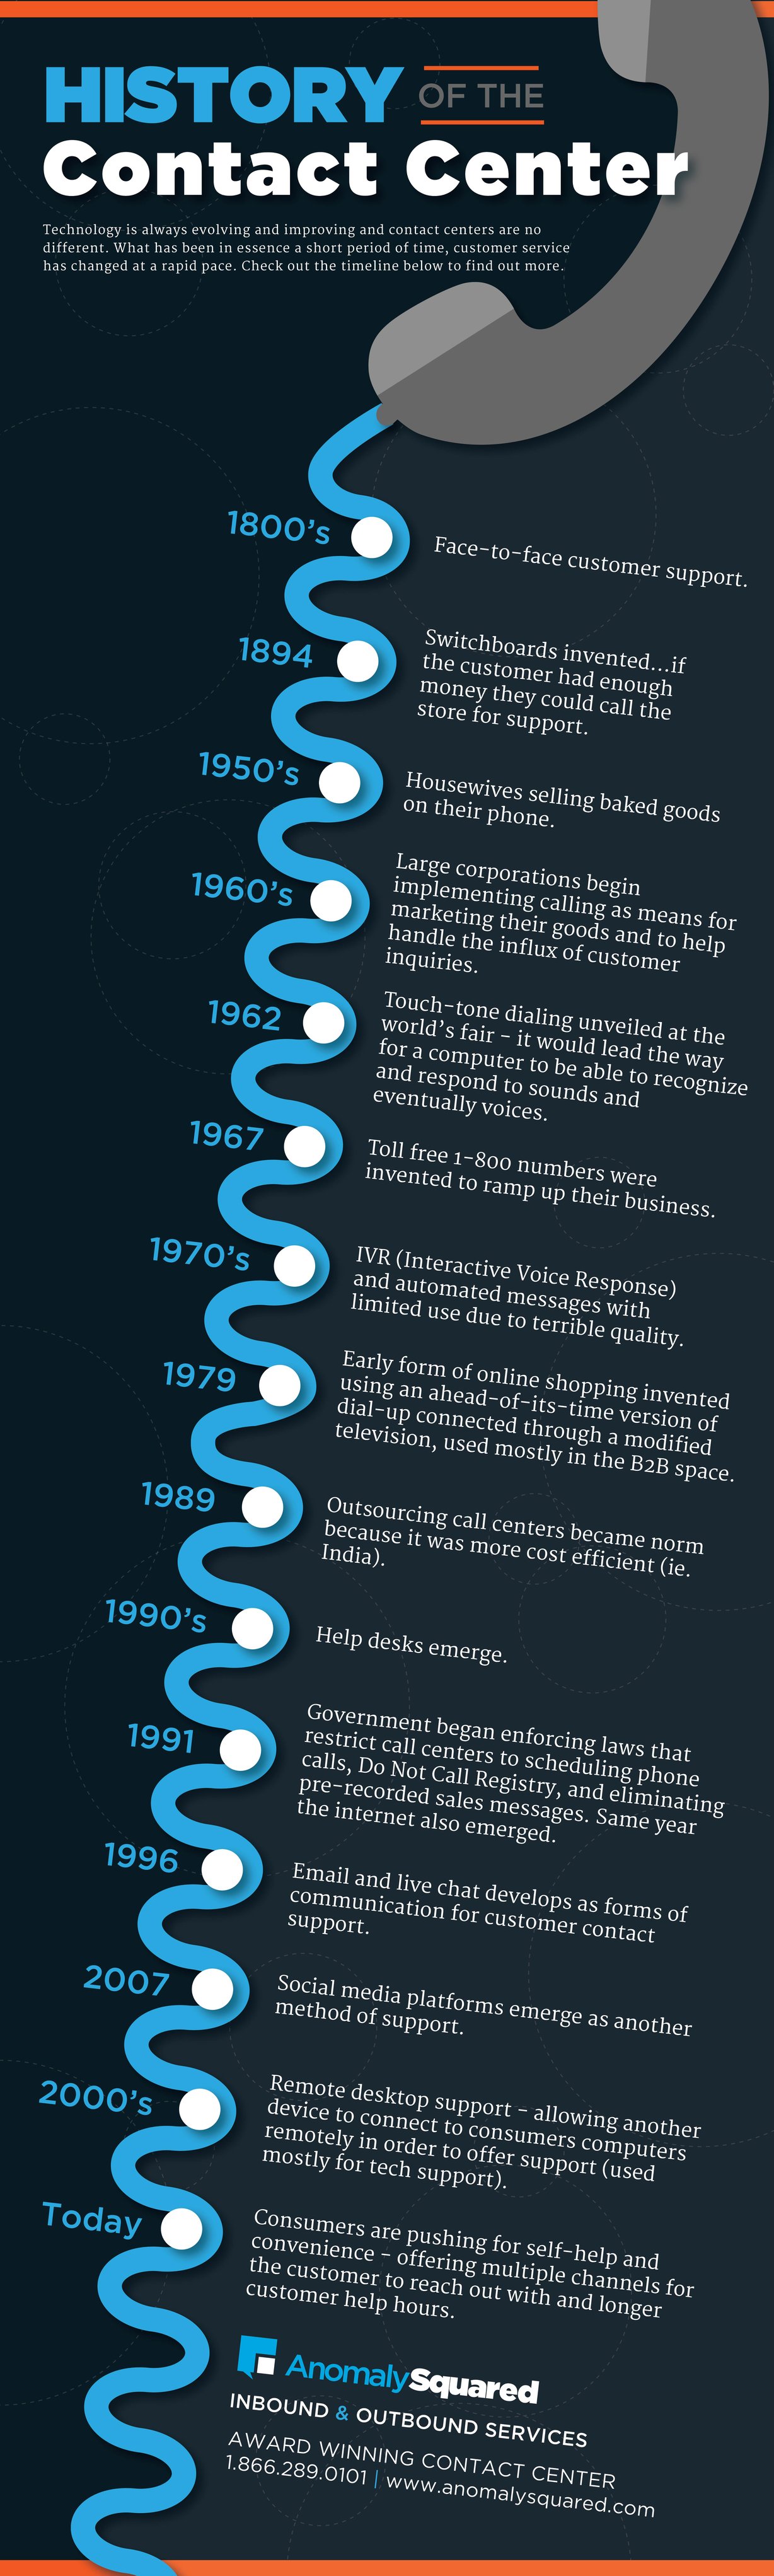 History of Contact Centers [Infographic]